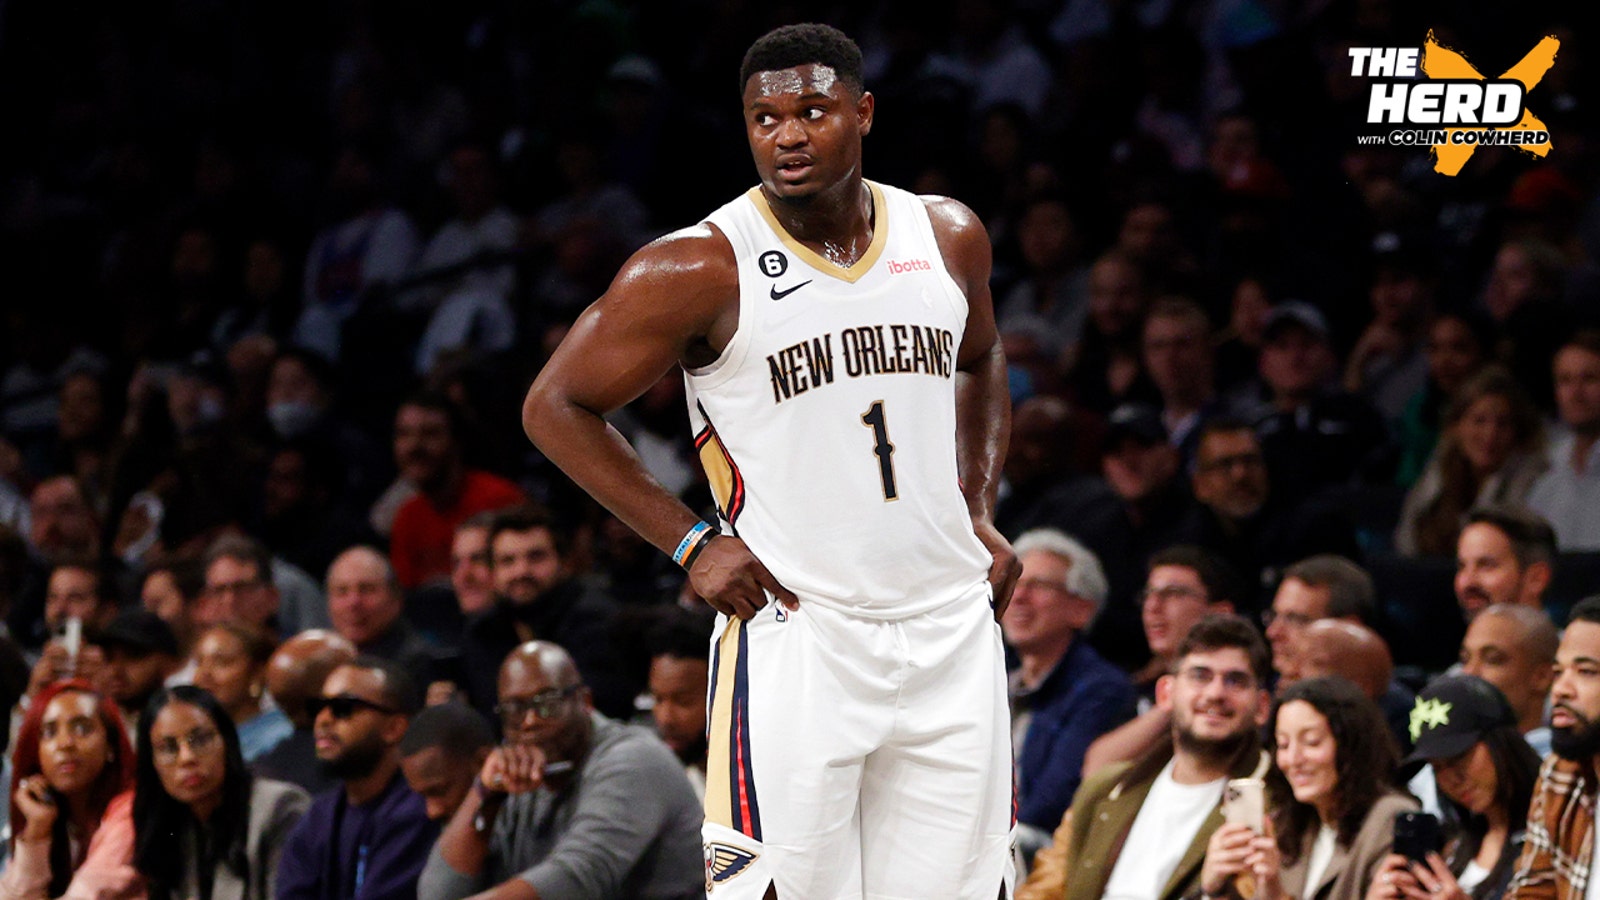 Pelicans practice report: Zion Williamson injury absence to extend beyond  All-Star break